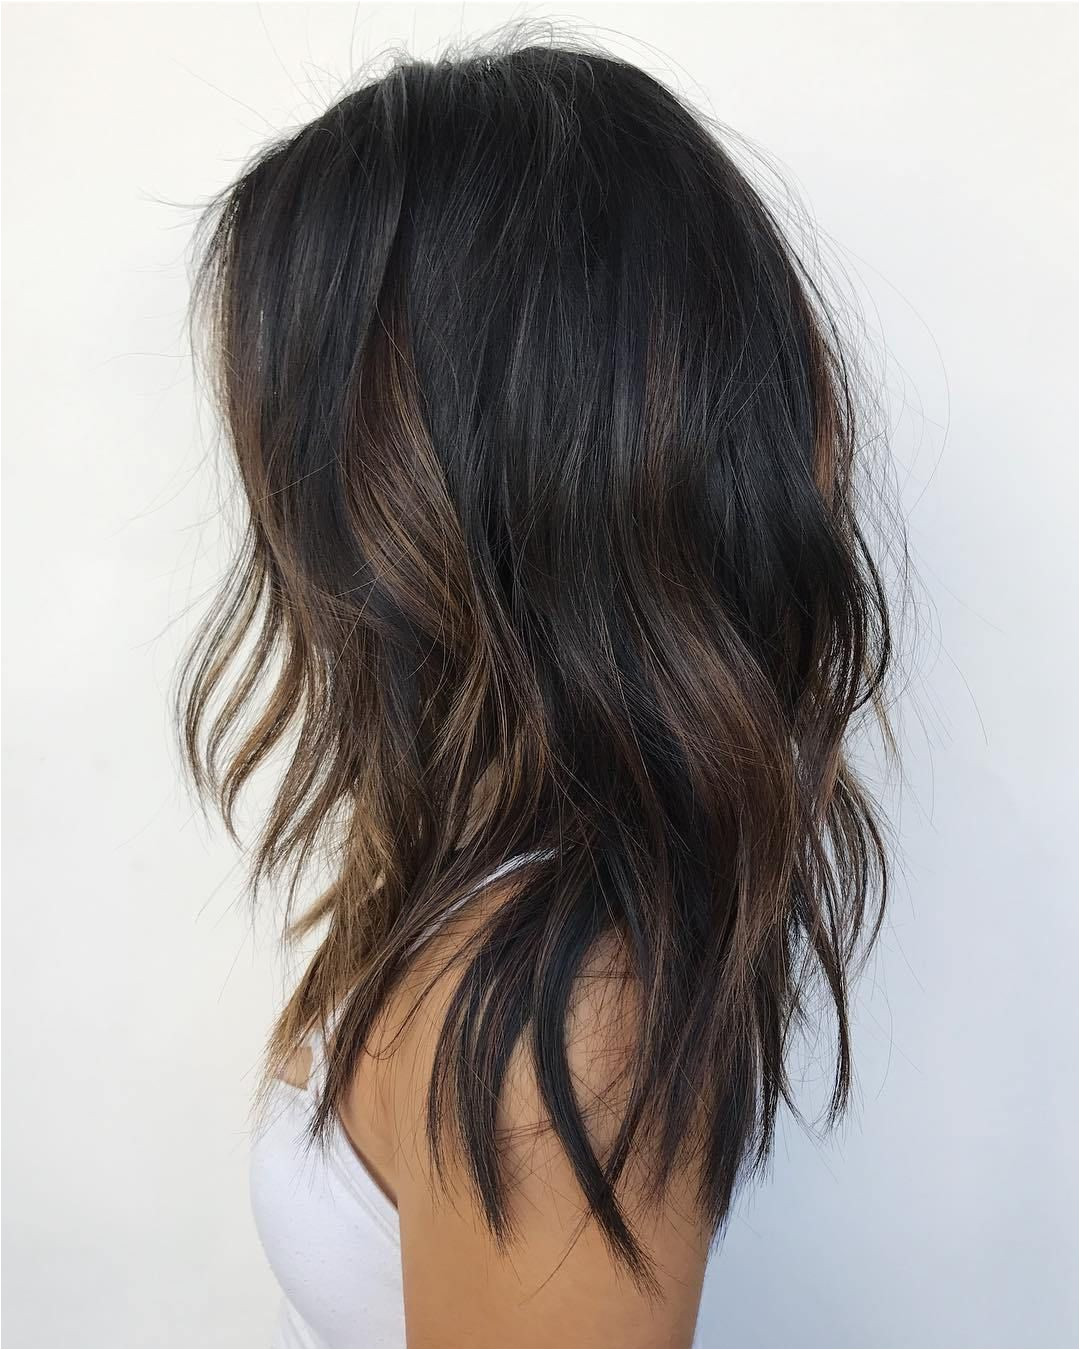 Black Hair With Subtle Brown Highlights